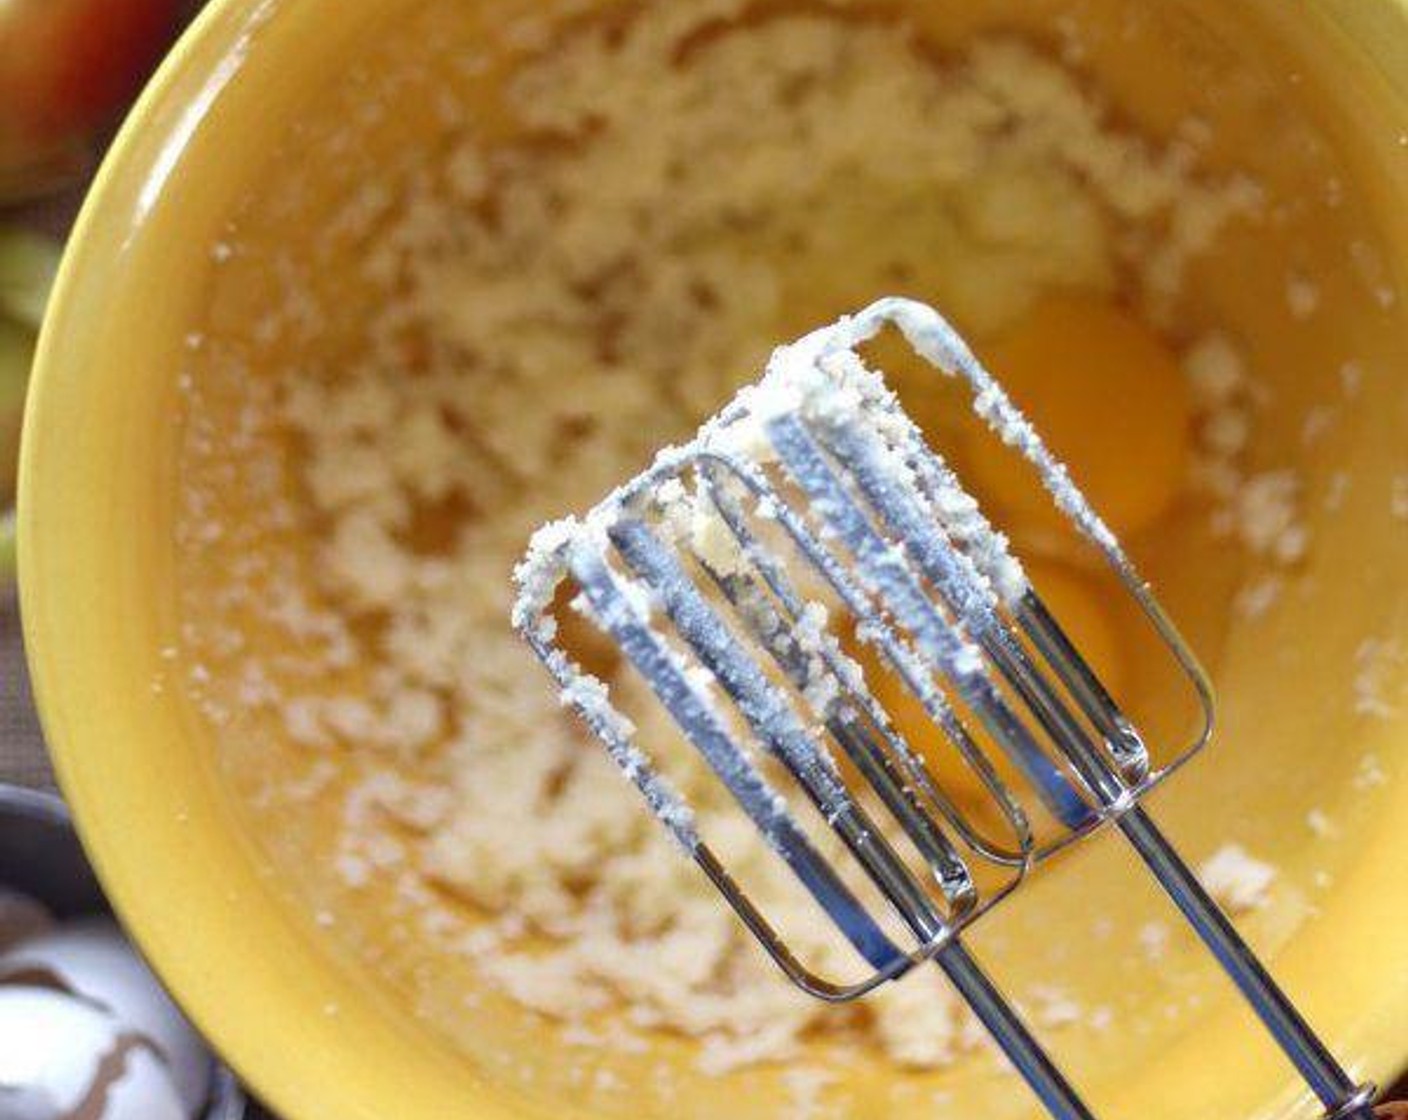 step 4 In a bowl, stir together the All-Purpose Flour (1 cup), Baking Powder (1 tsp), Salt (1/4 tsp), and Ground Cinnamon (1/4 tsp). In a separate larger bowl, beat the Granulated Sugar (1/2 cup) and Butter (1/4 cup) together until light and fluffy. Whip in the Eggs (2) and Vanilla Extract (1 tsp).